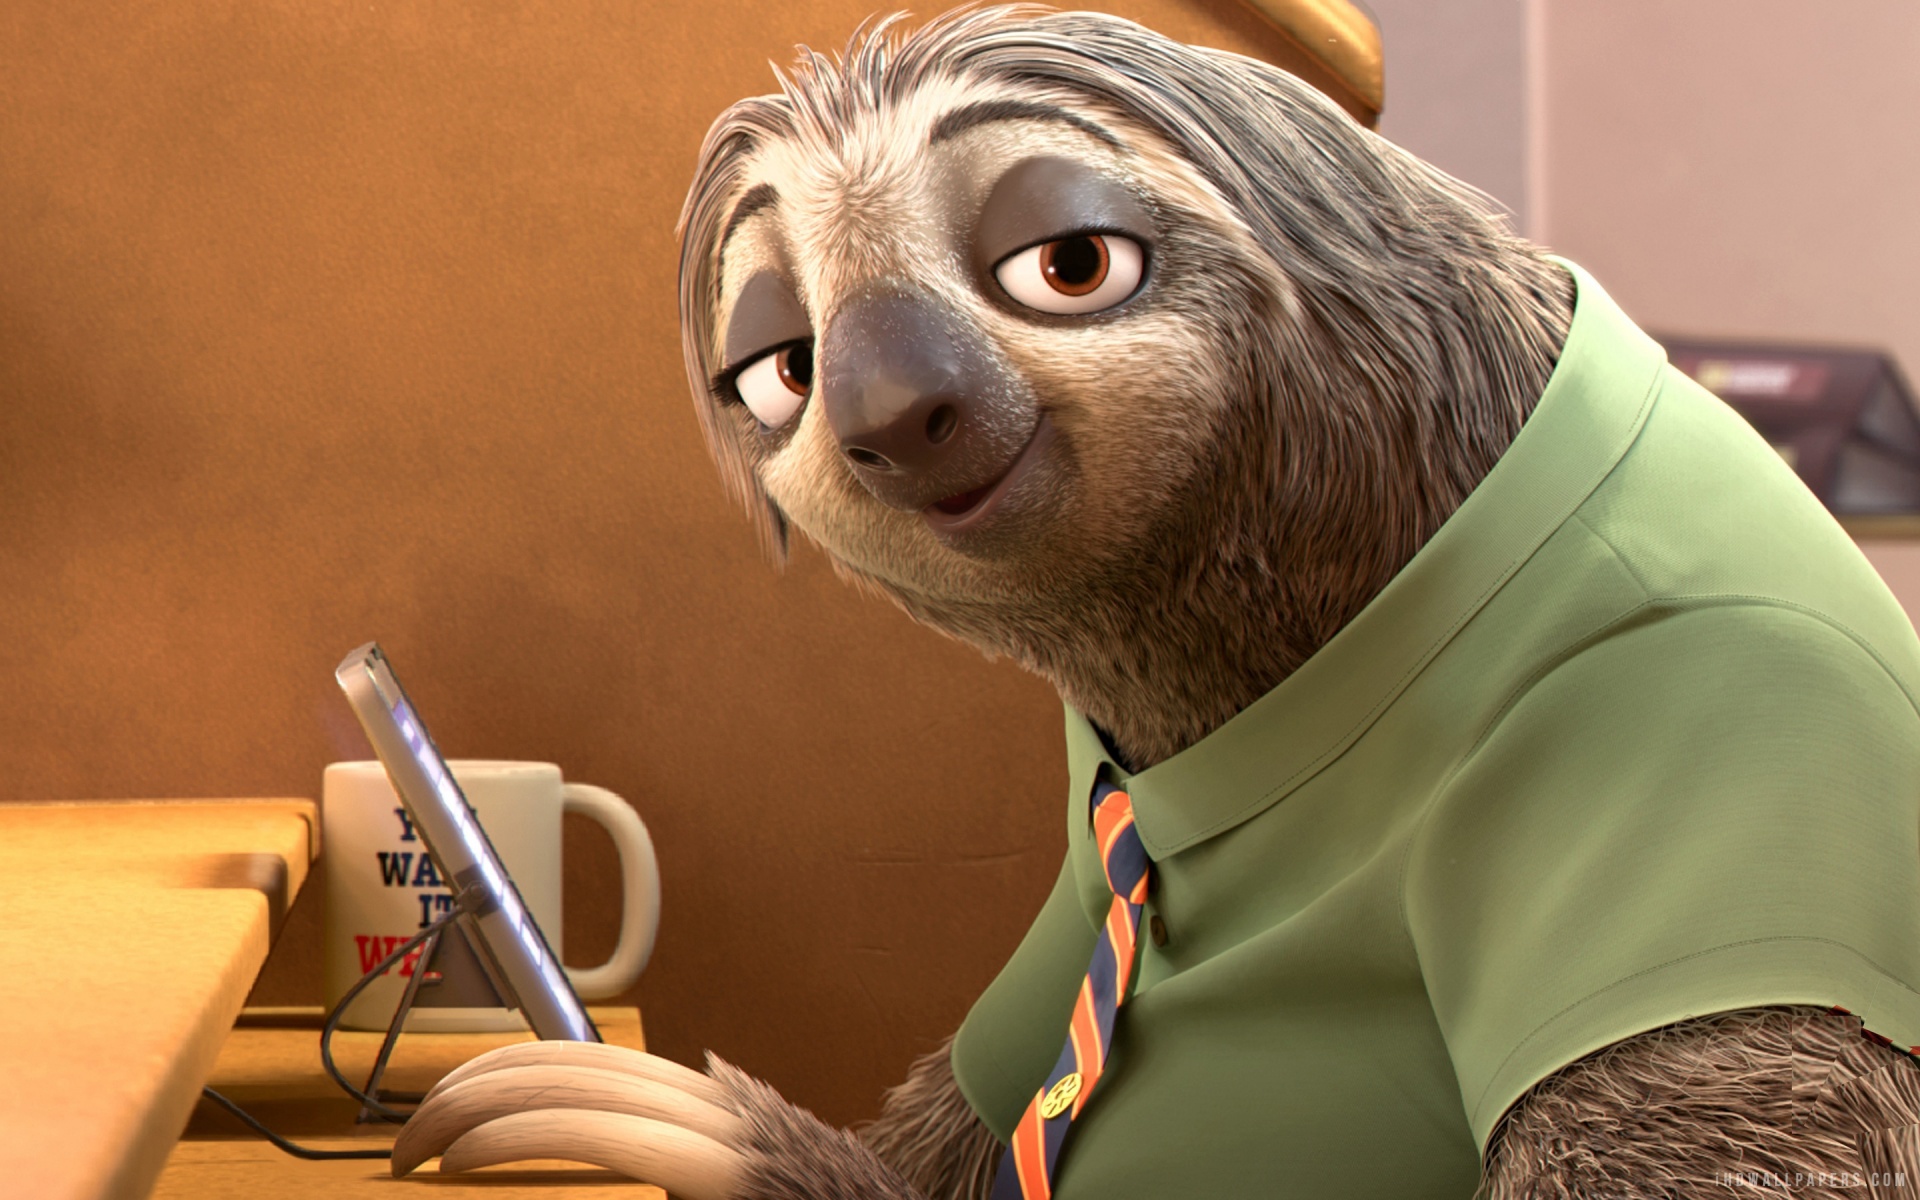 Sloth in Zootopia Movie HD Wallpaper   iHD Wallpapers